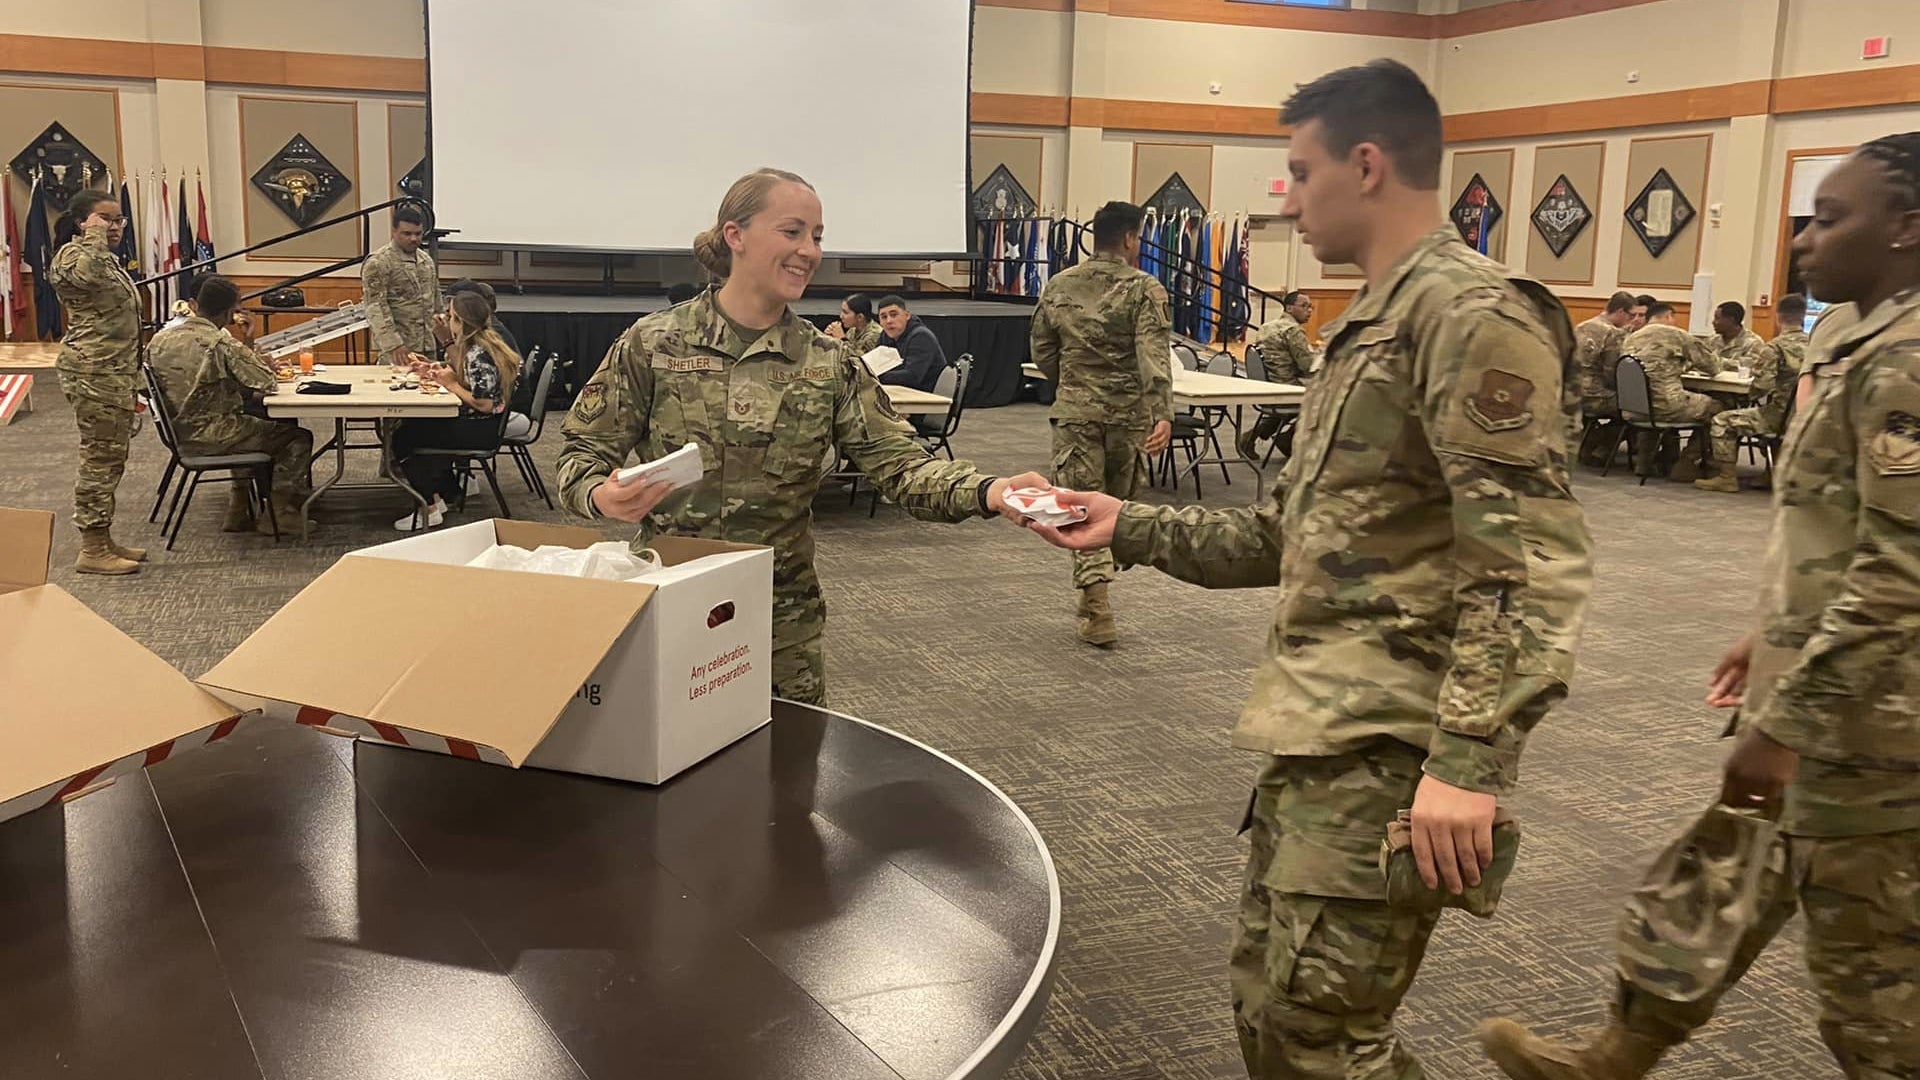 We salute the airmen who got 300 Chick-fil-A sandwiches flown in to feed their buddies